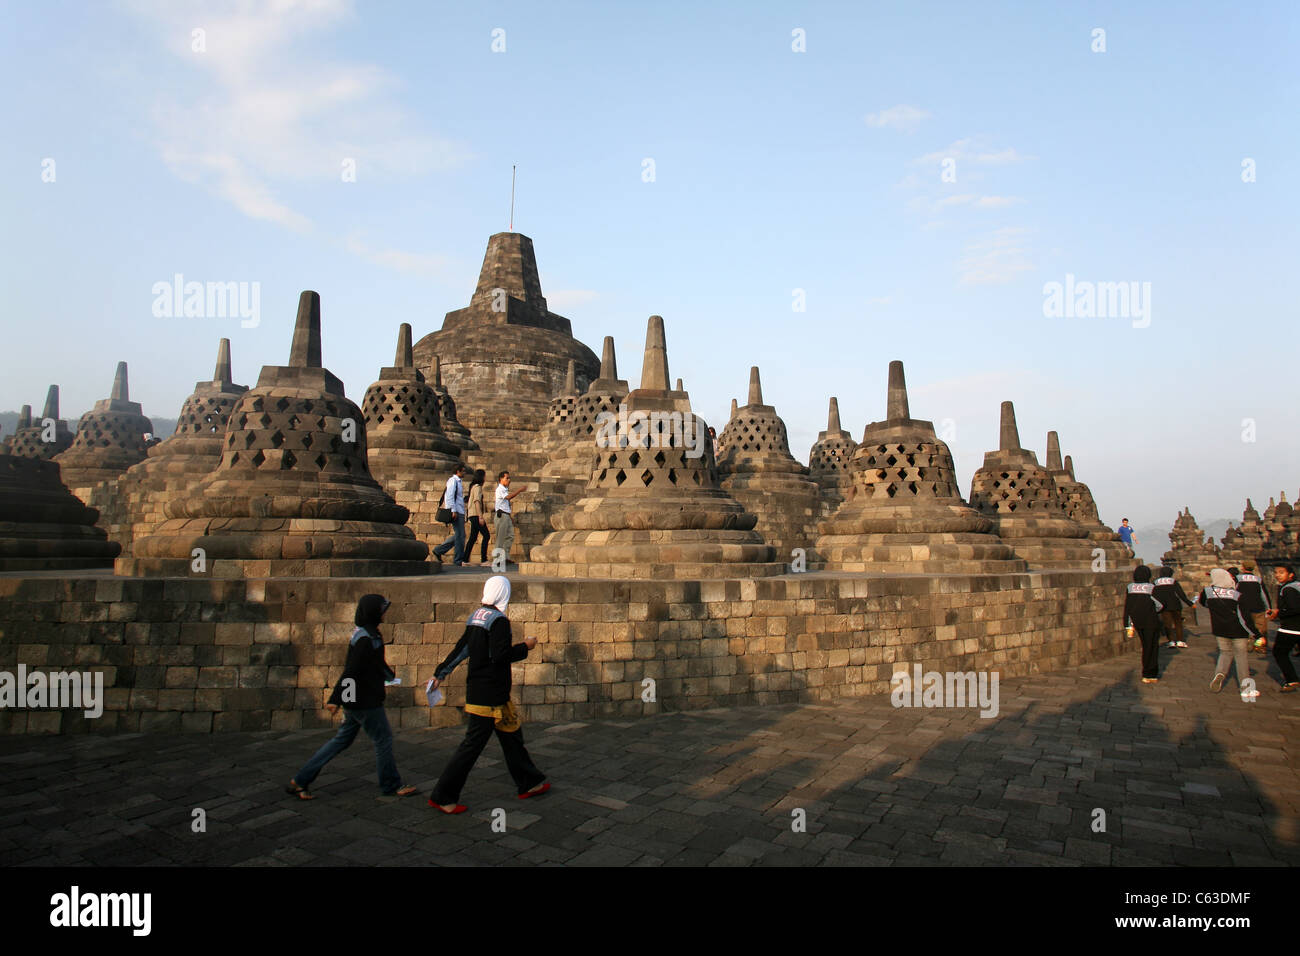 The central stupa & terraces of Borobudur the largest Buddhist temple in Indonesia. Yogyakarta, Java, Indonesia, South-East Asia Stock Photo